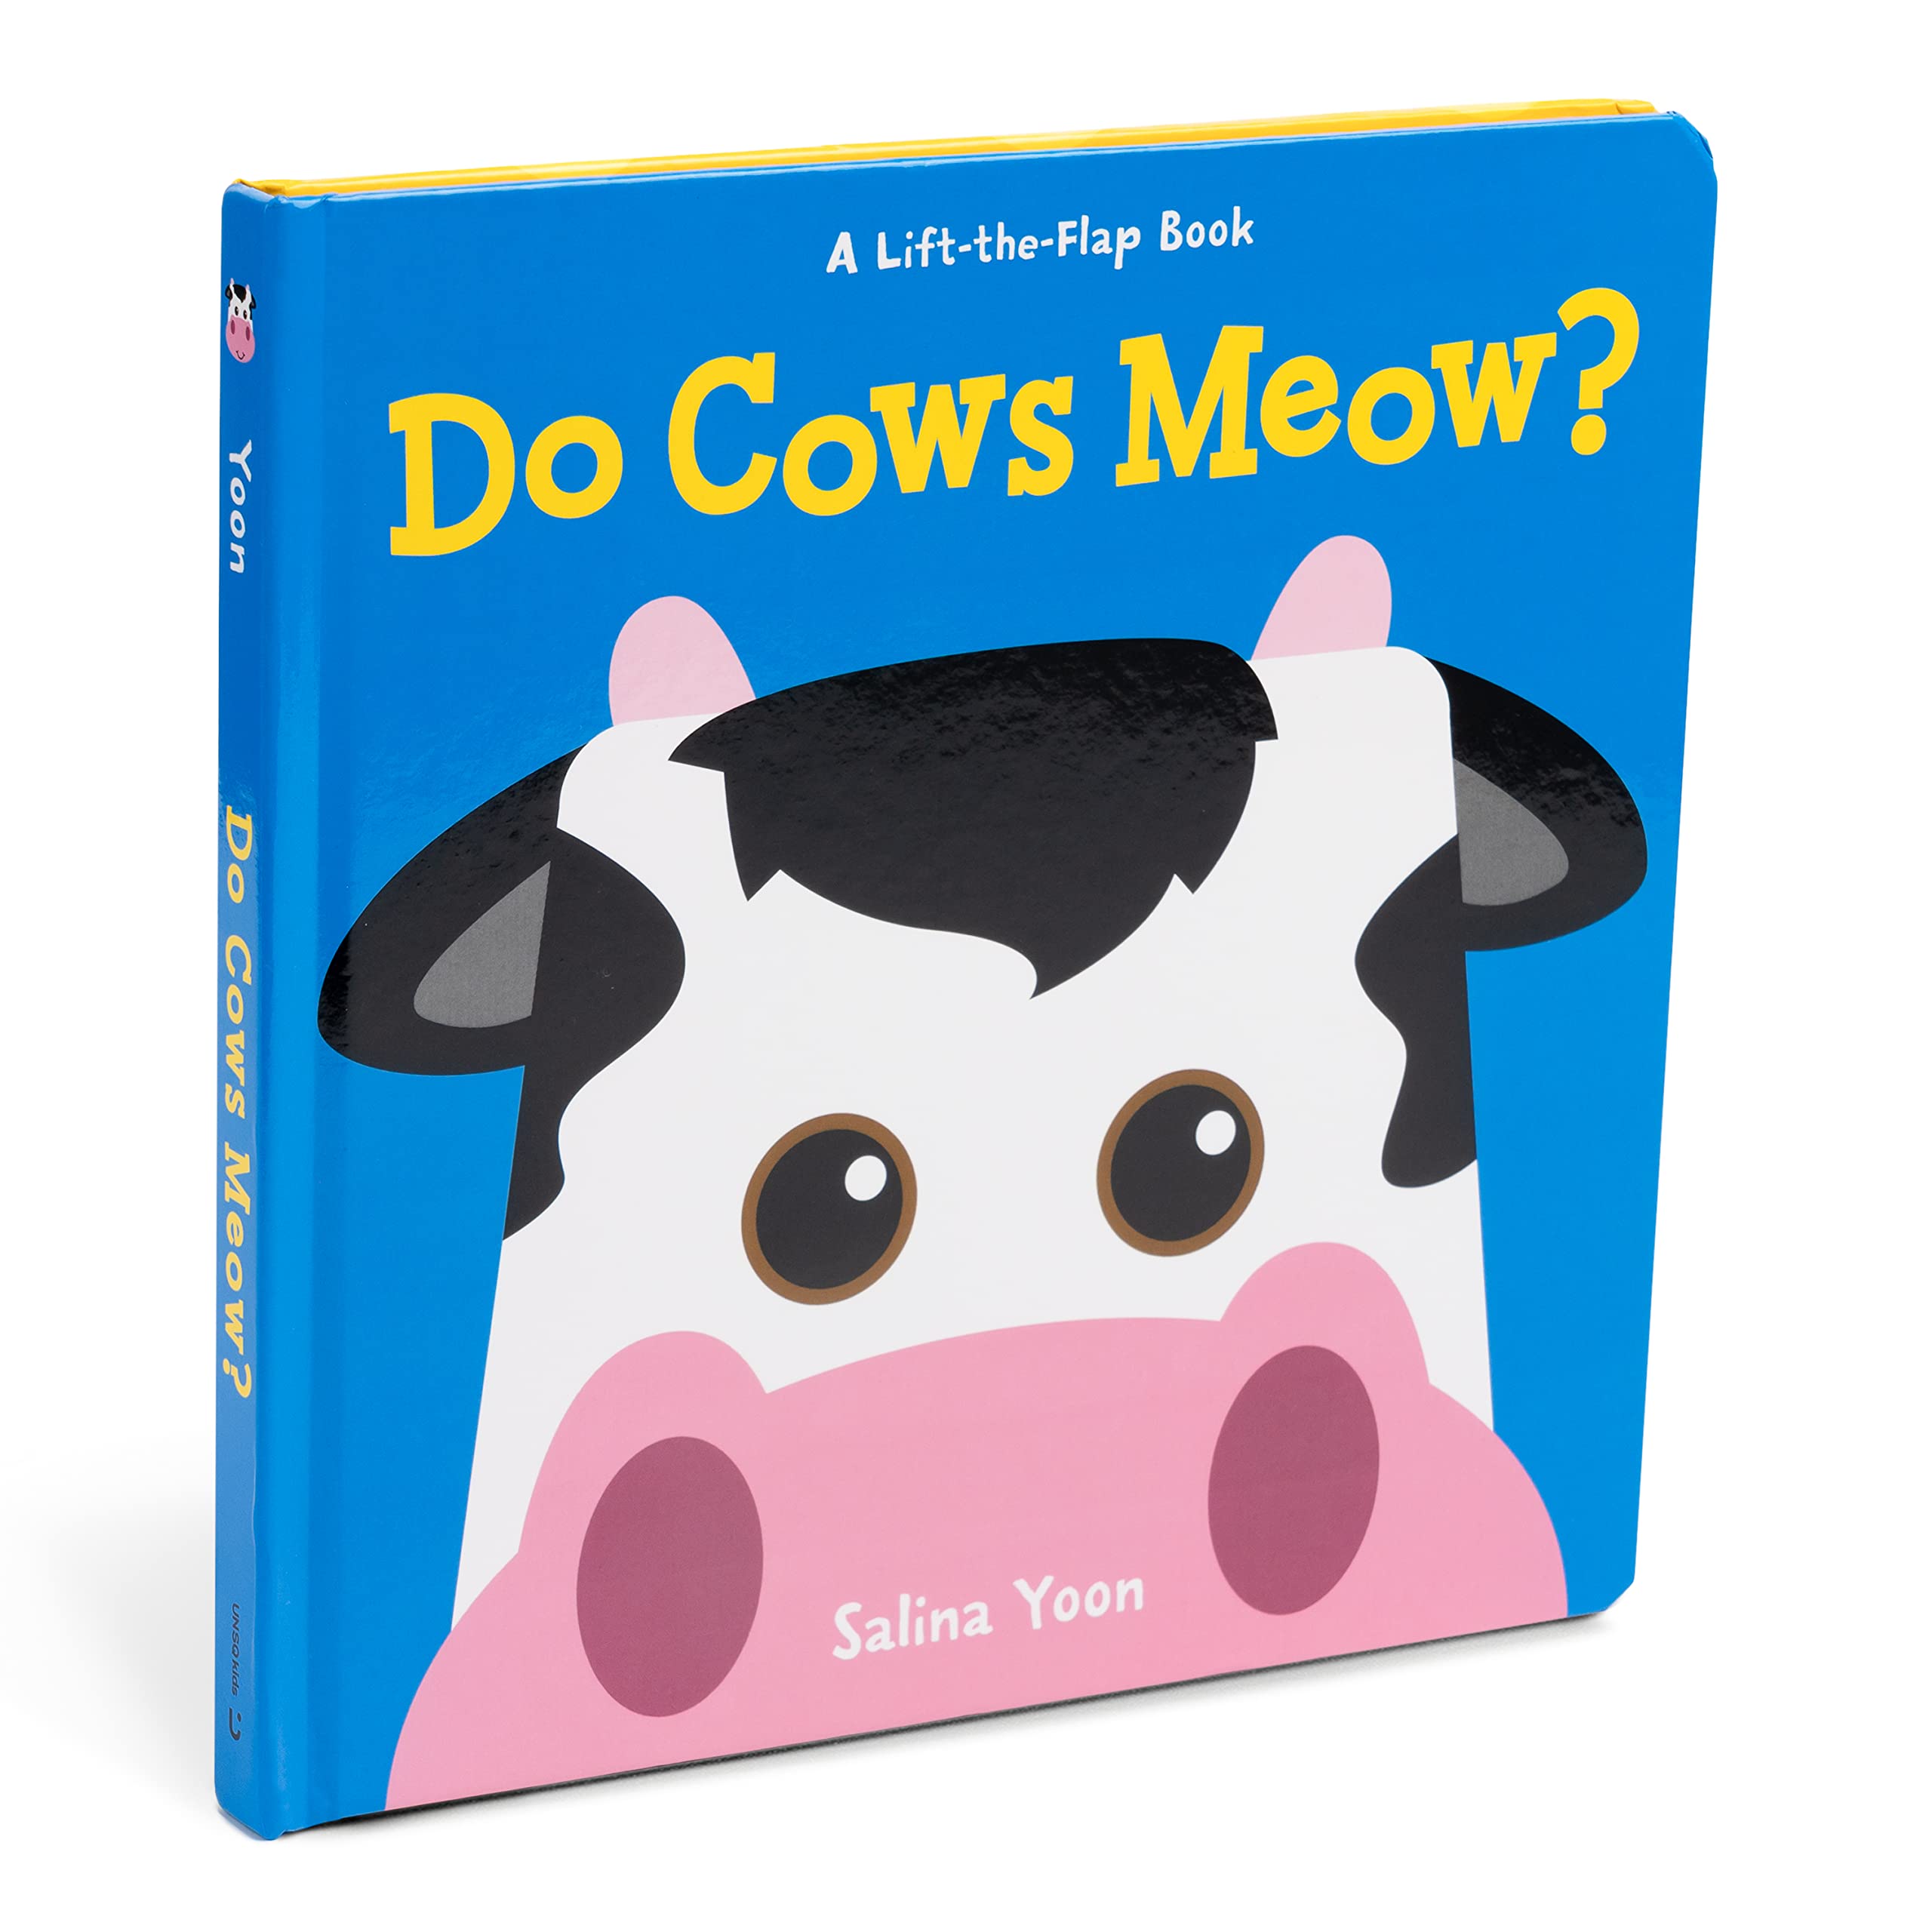 Do Cows Meow? (A Lift-the-Flap Book)